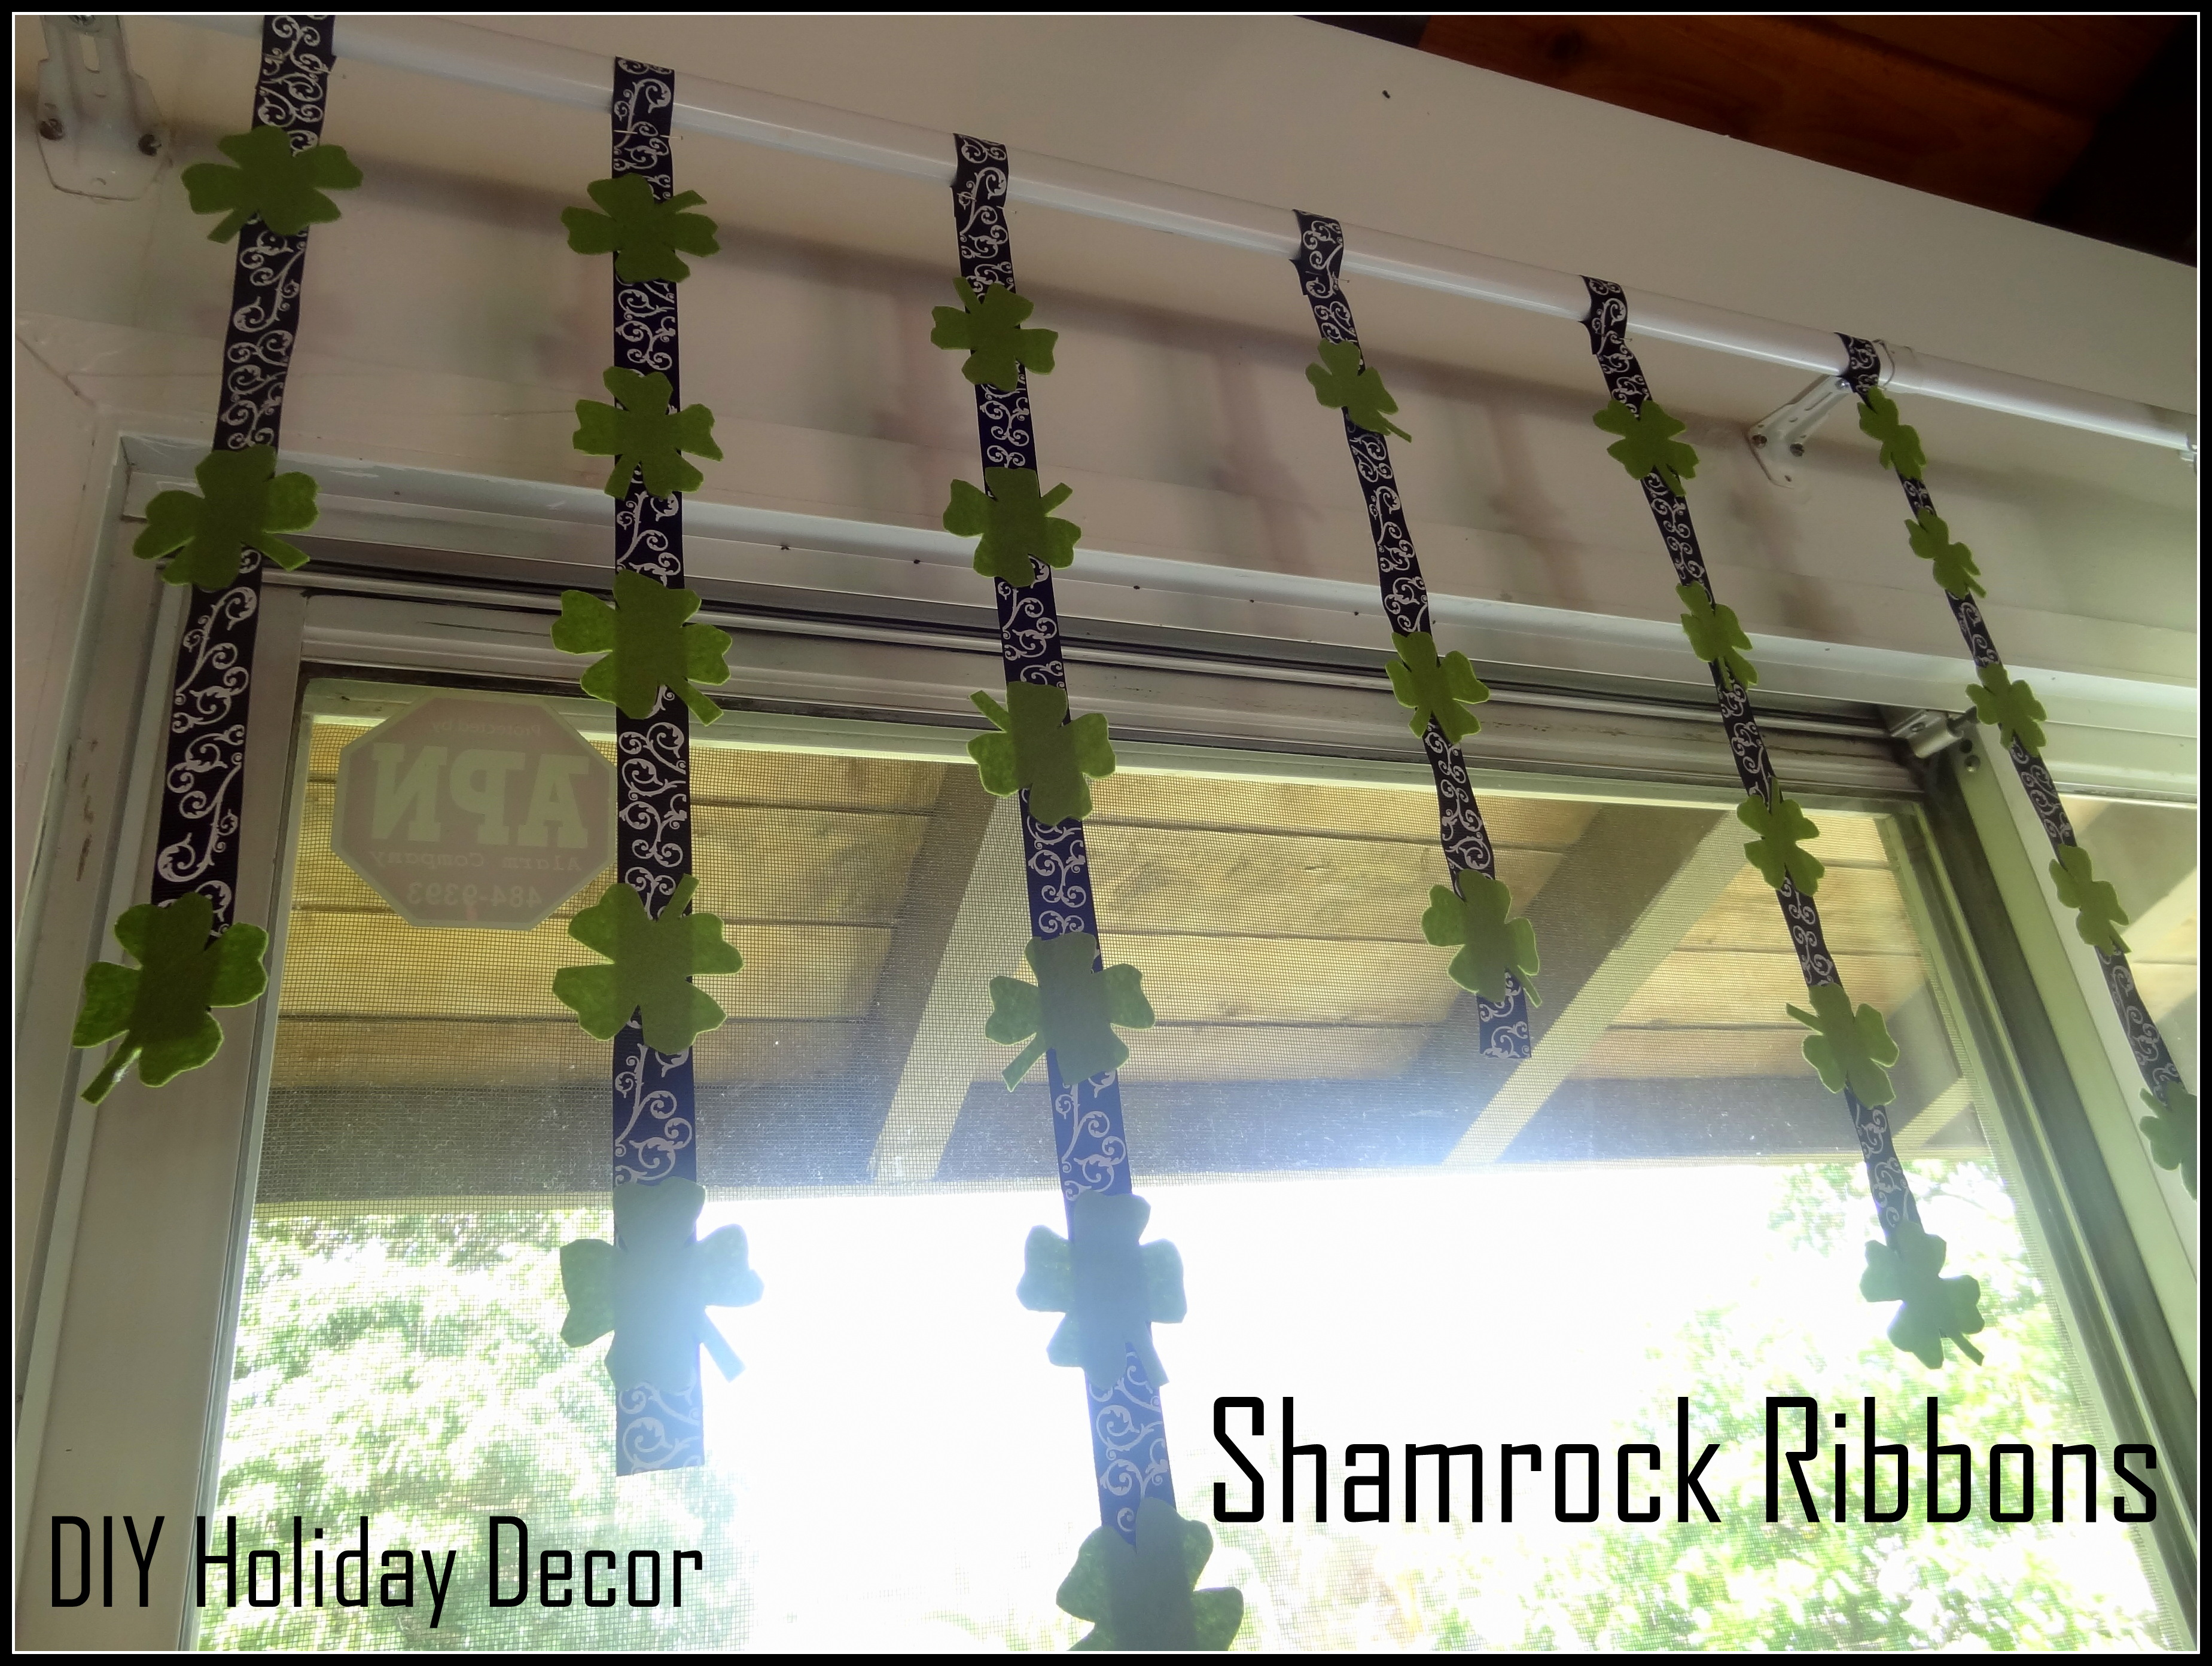 Shamrock Ribbons – Bring HOME the Luck of the Irish